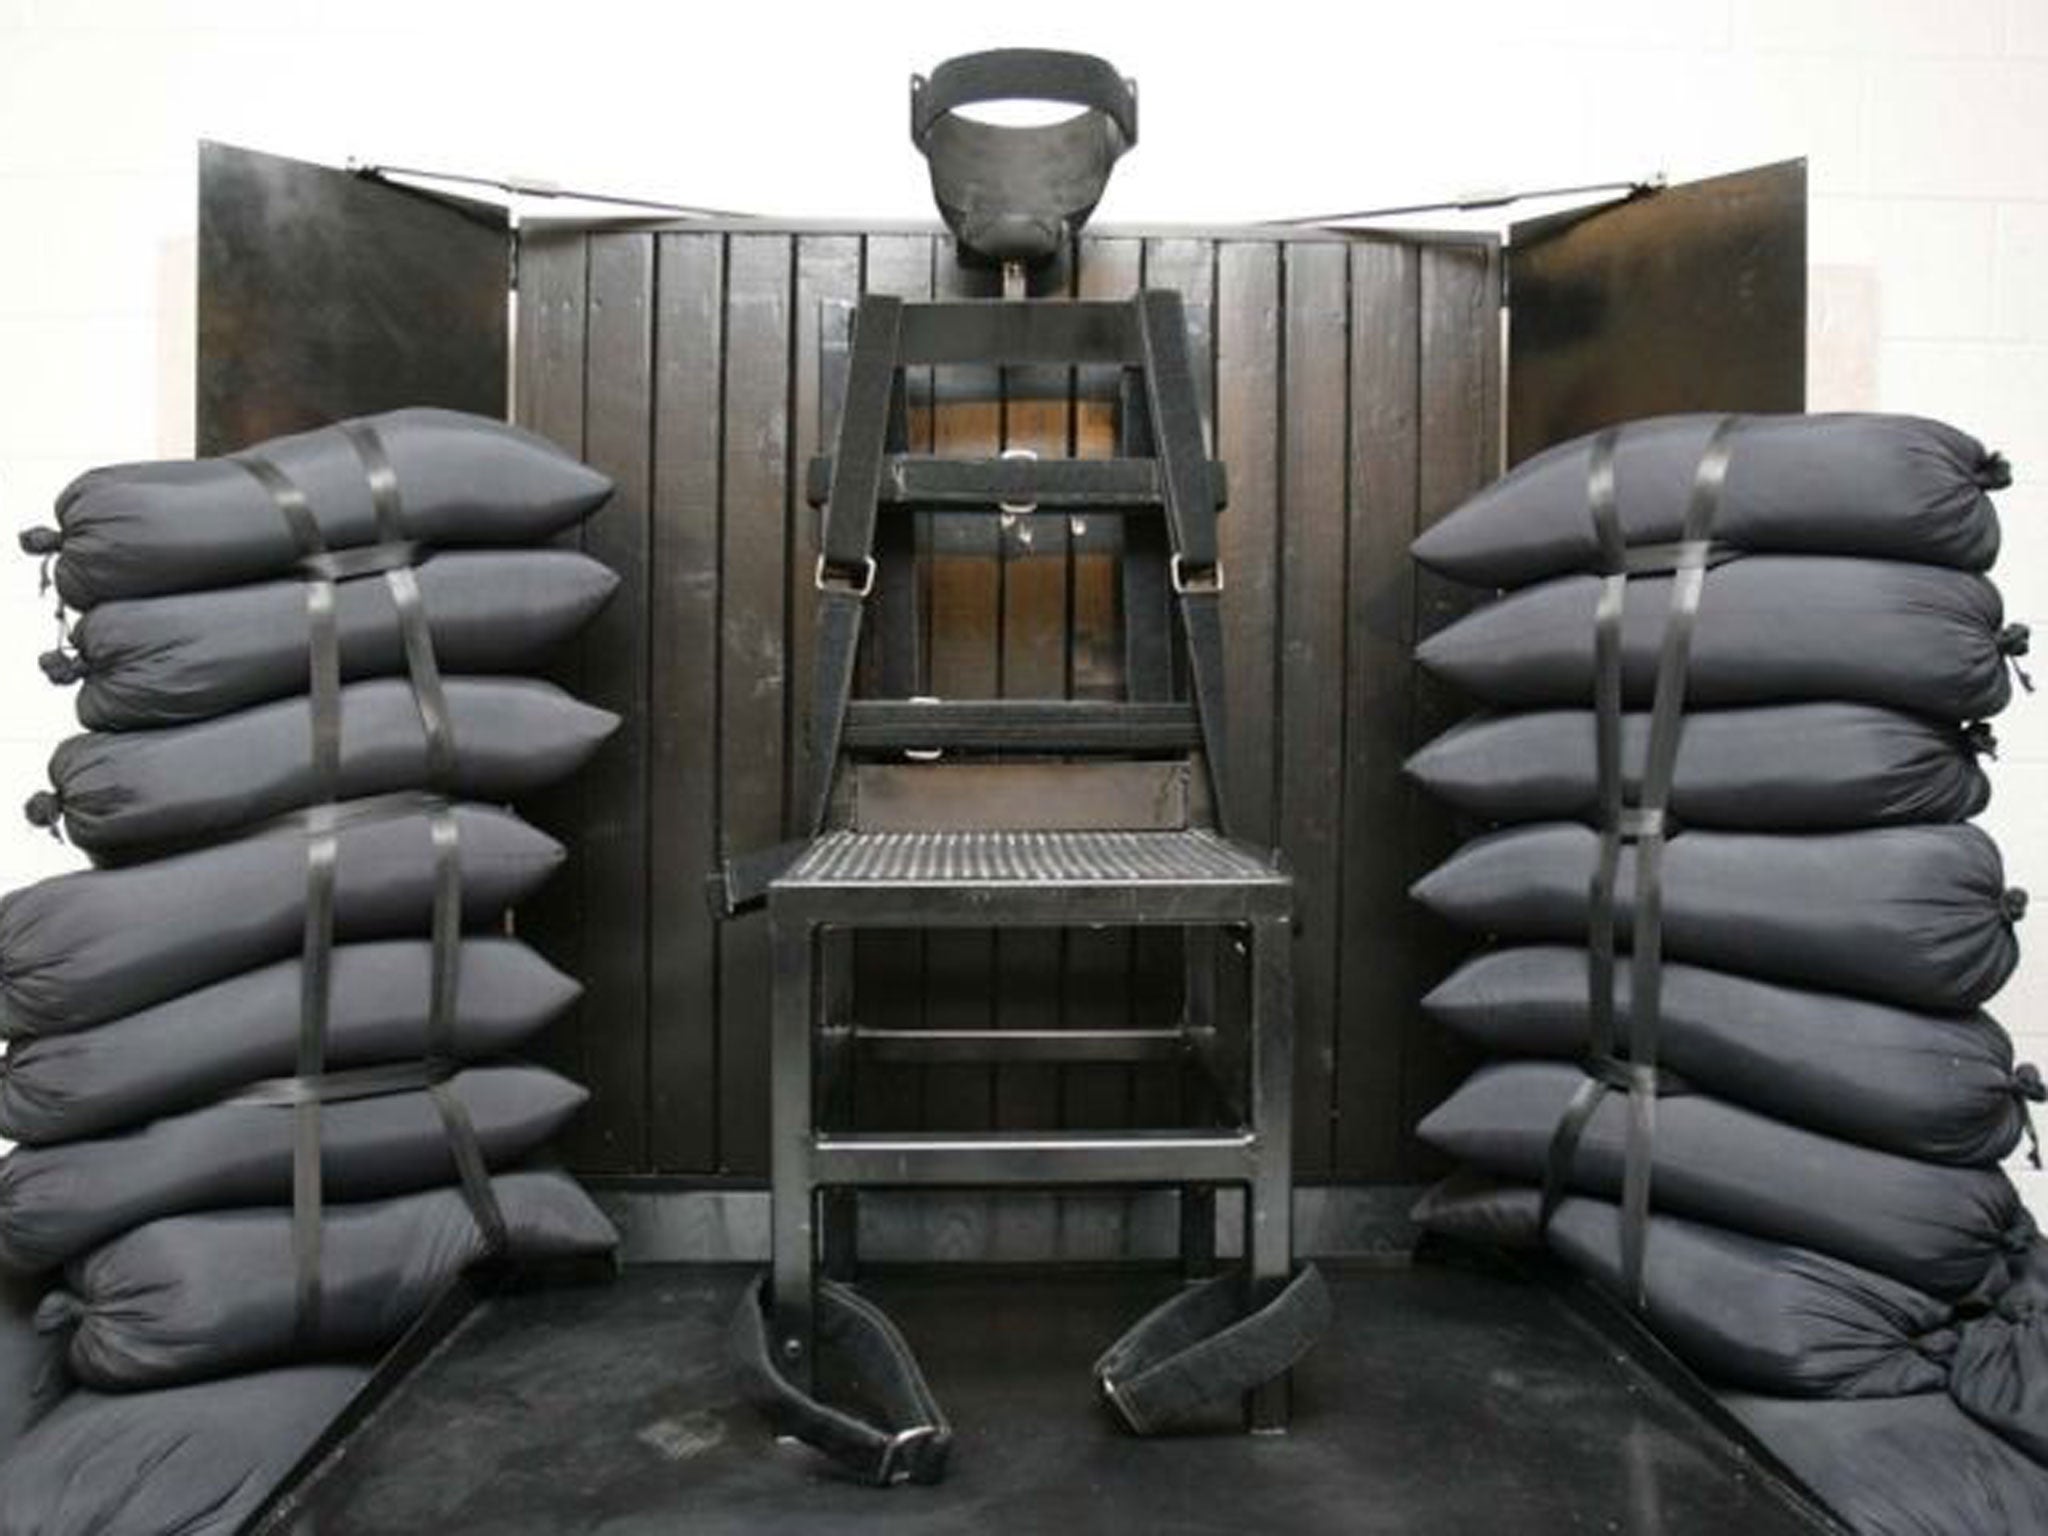 The firing squad execution chamber at the Utah State Prison in Draper, pictured in 2010. In the wake of a bungled execution in Oklahoma last month, a Utah lawmaker wants to resurrect firing squads as a method of execution in his state